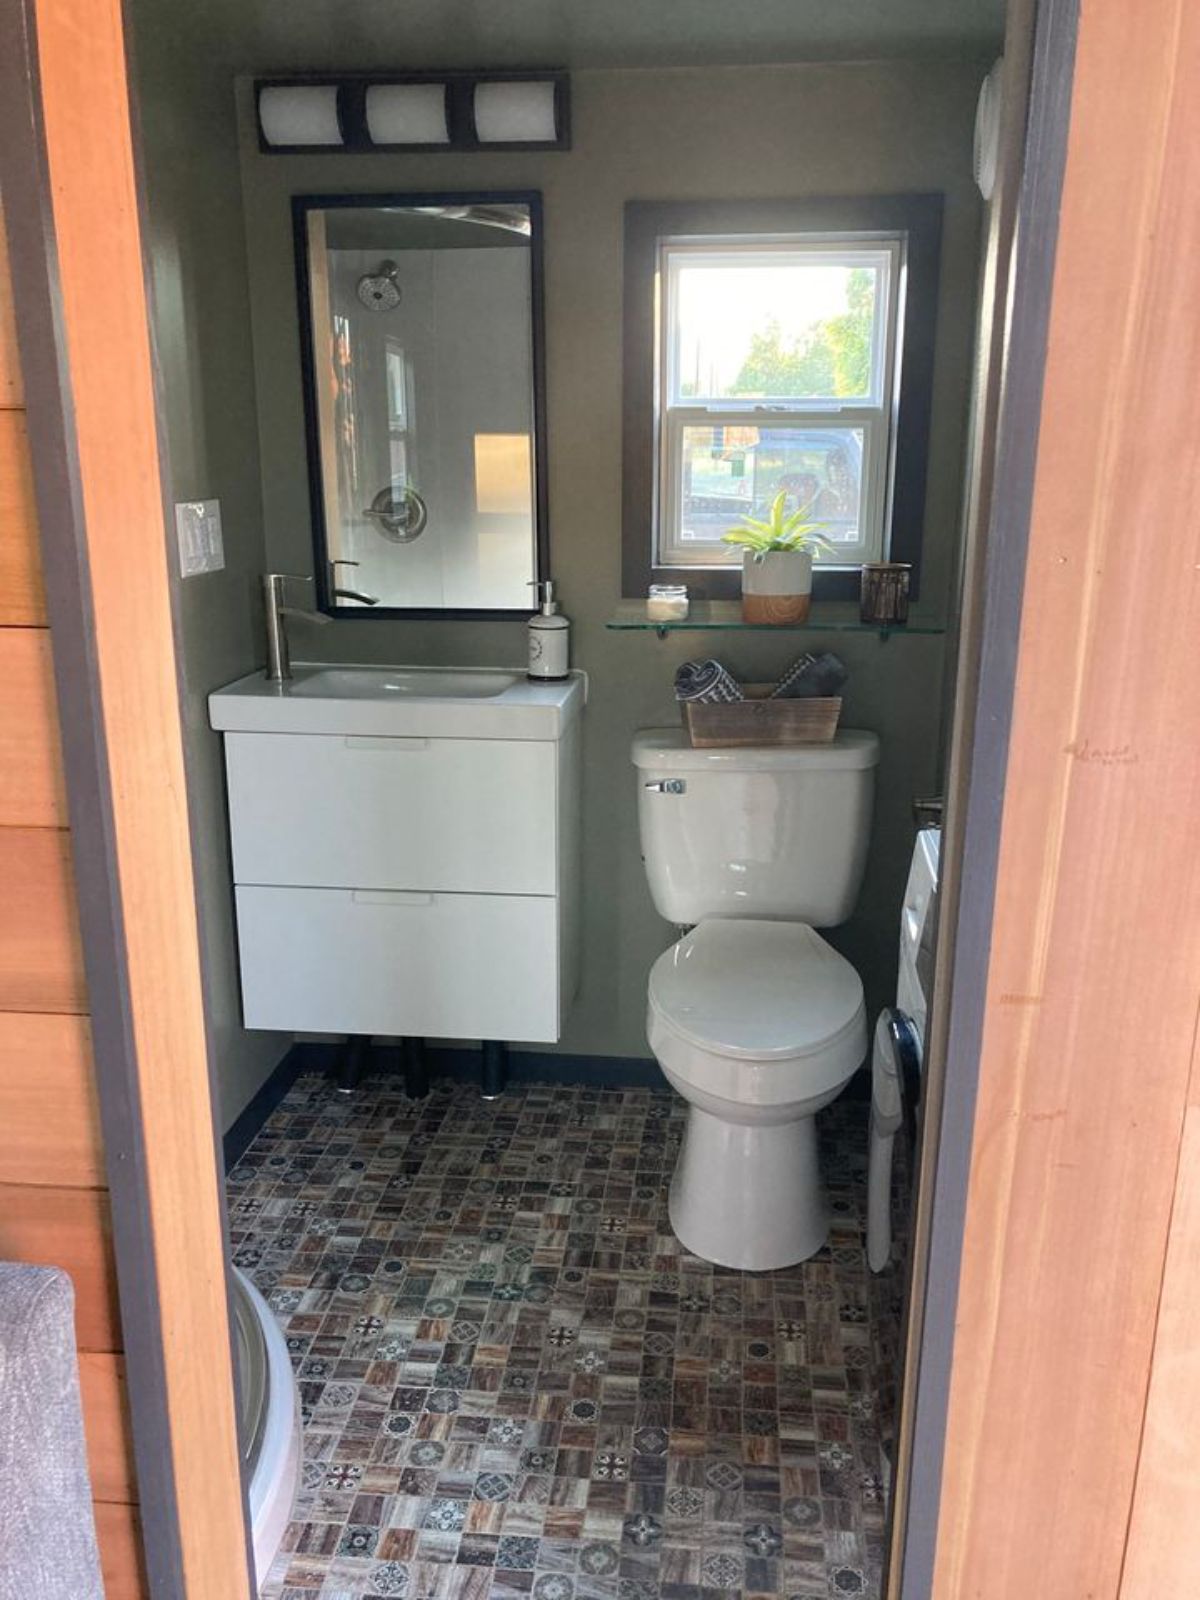 white toilet and vnaity in bathroom with tiled floors